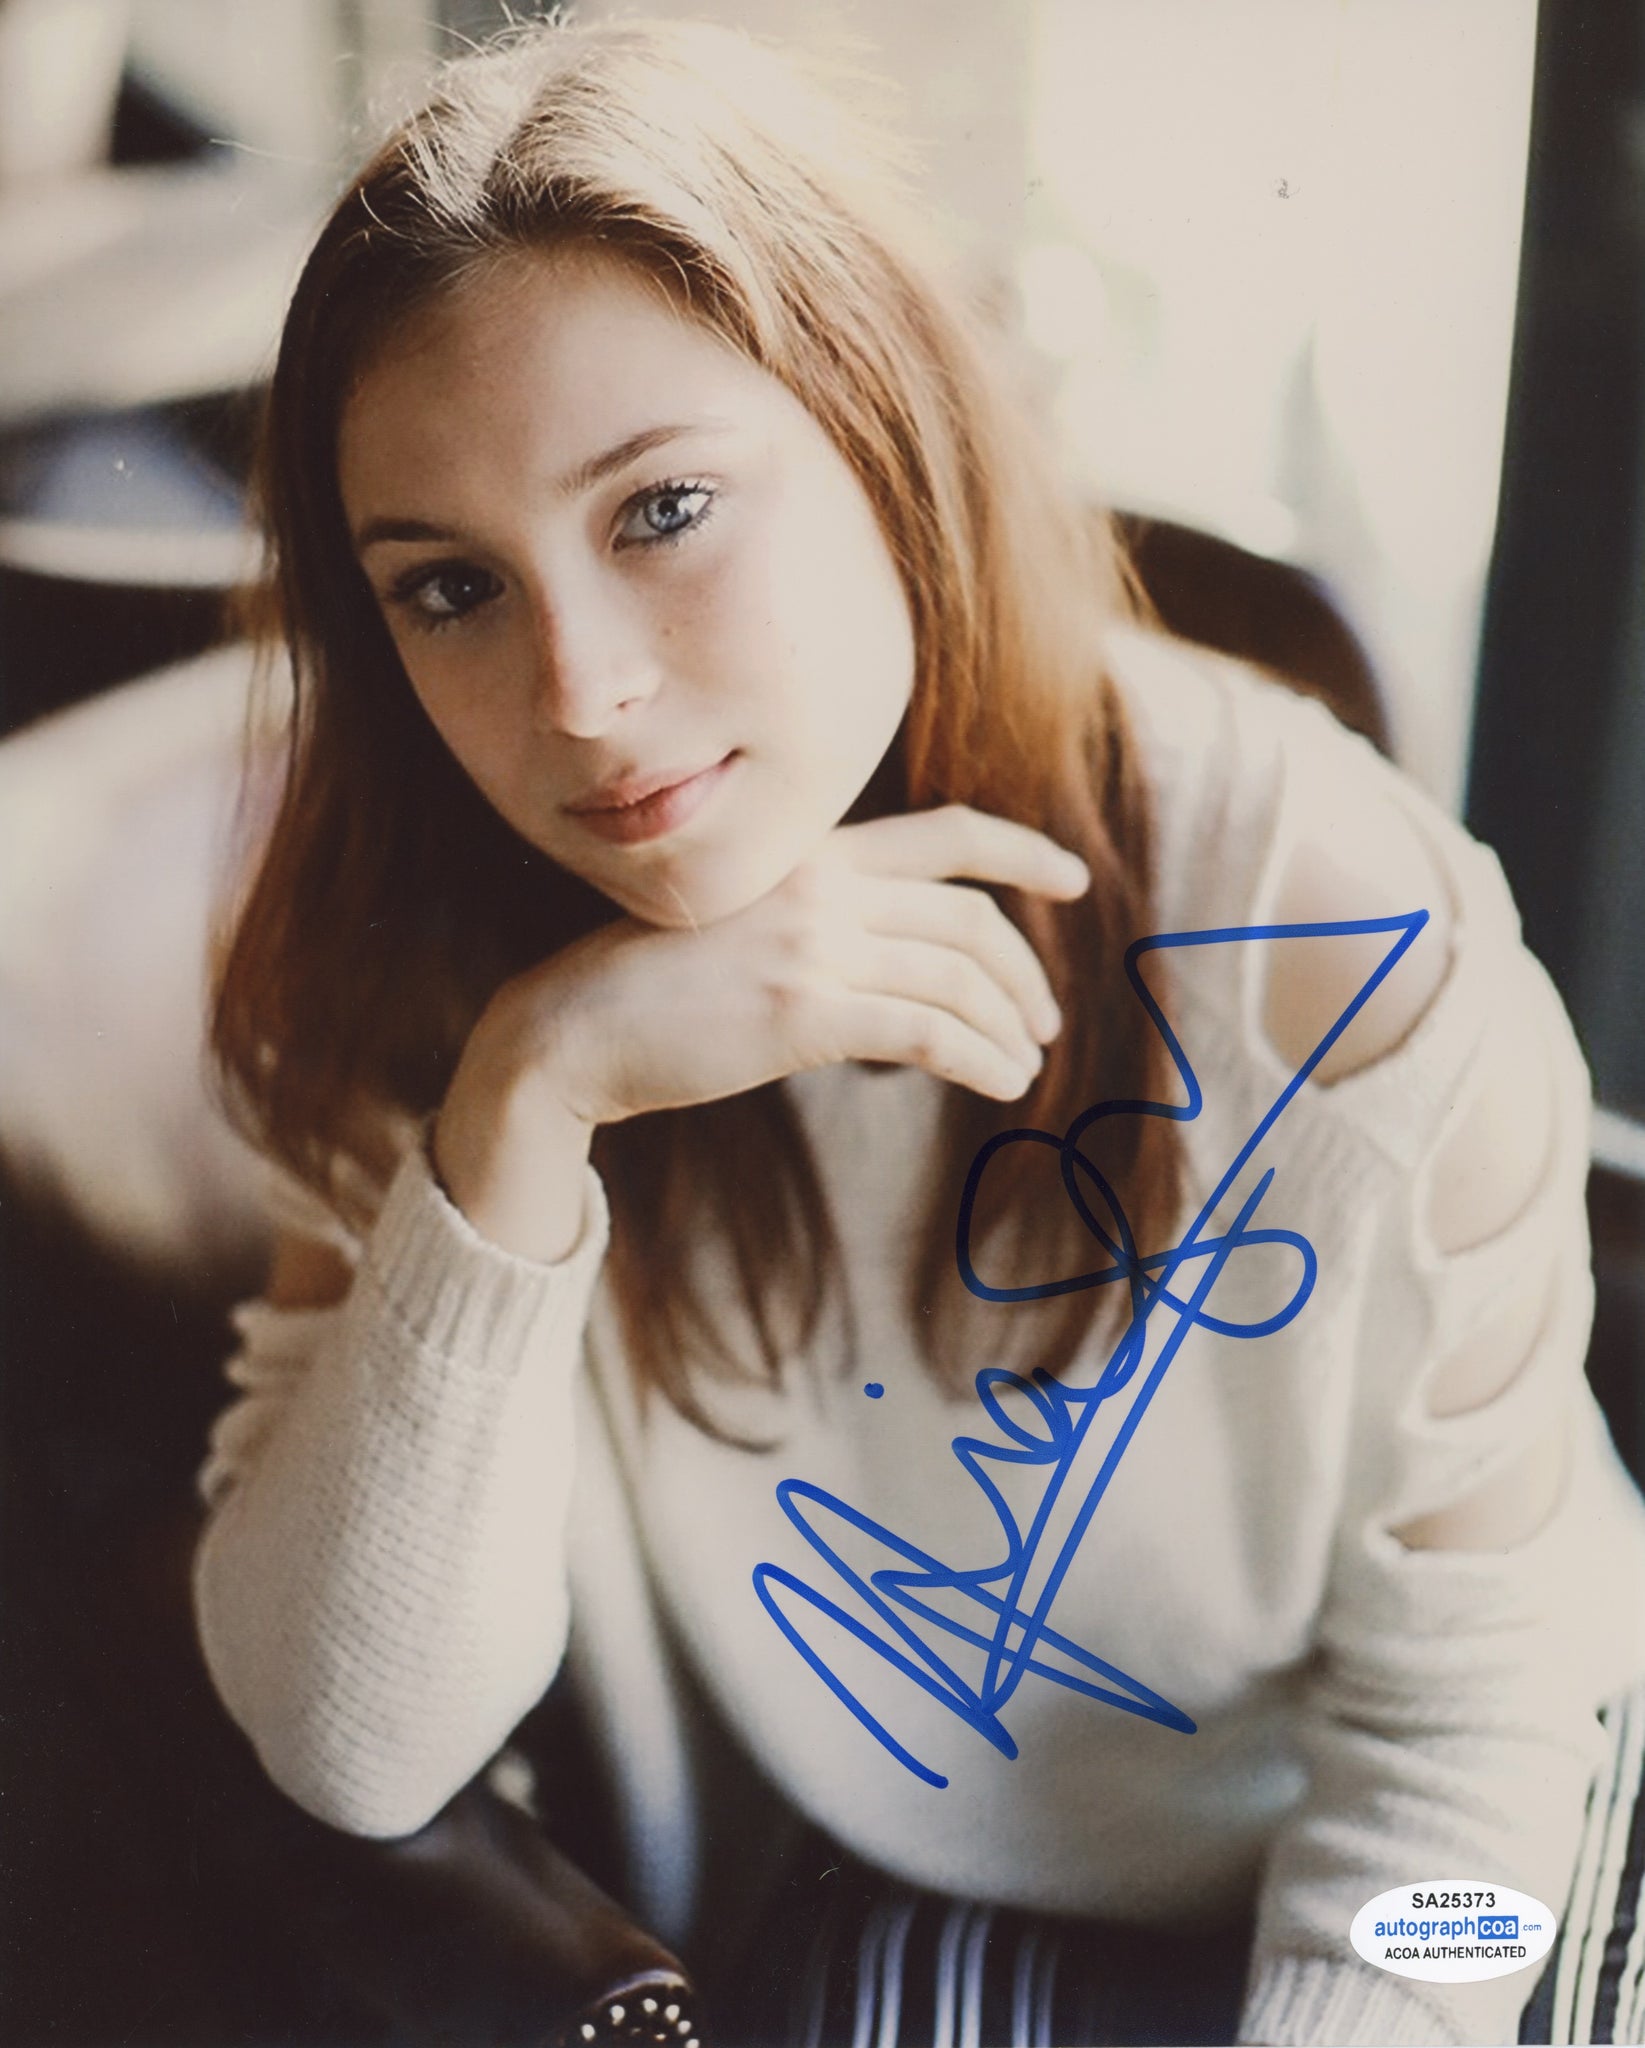 Mina Sundwall Lost in Space Signed Autograph 8x10 Photo ACOA #9 - Outlaw Hobbies Authentic Autographs